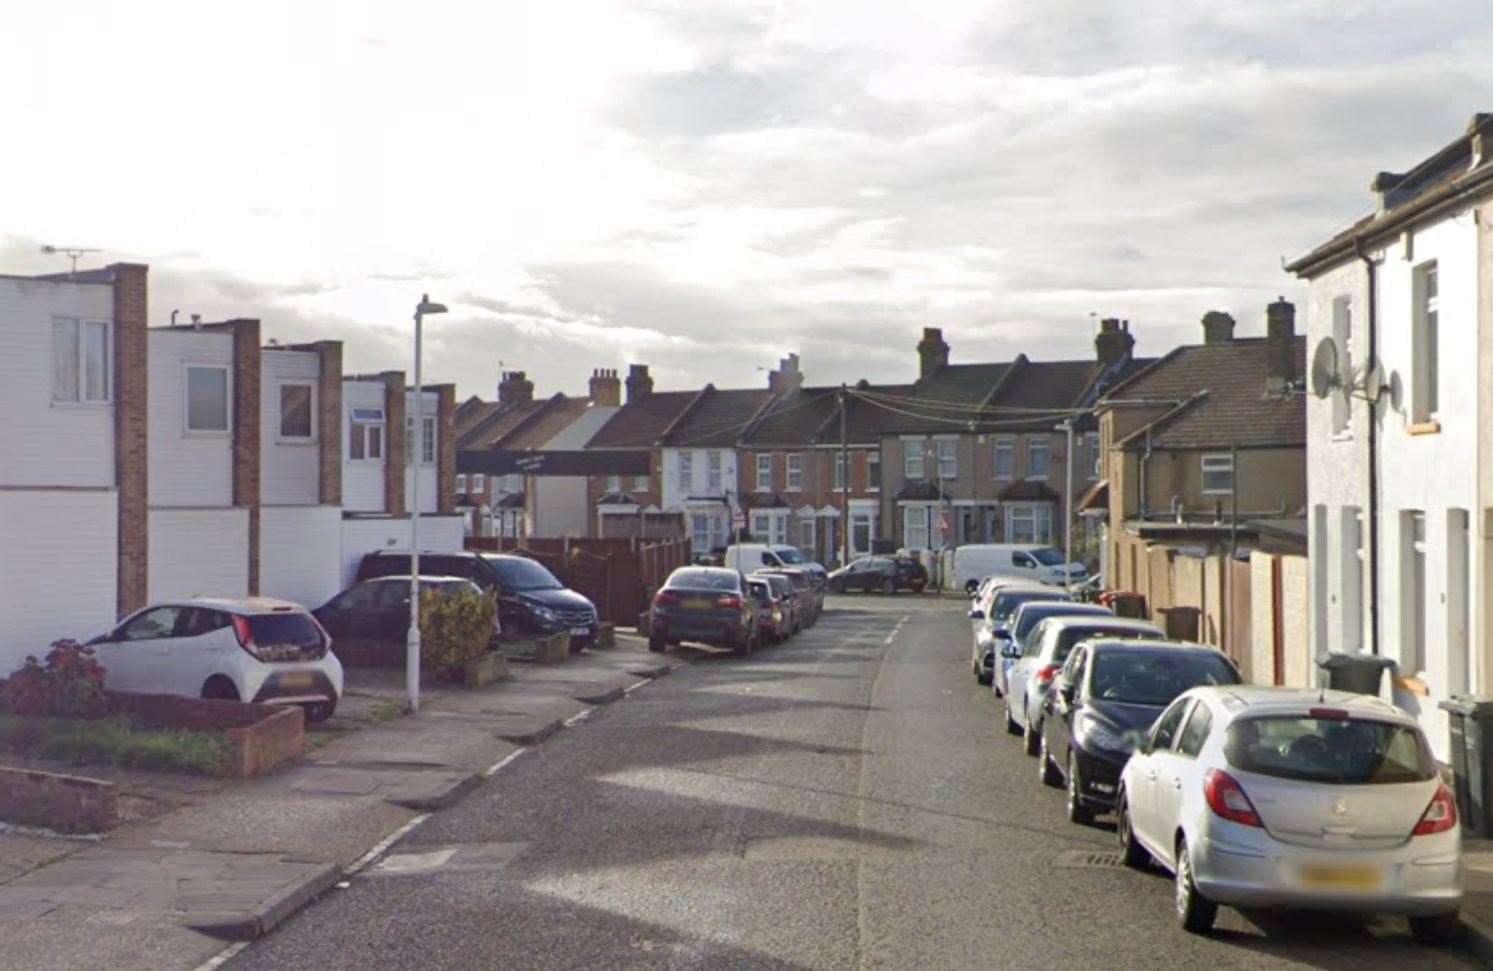 Police were called after a serious incident in York Road, Northfleet. Picture: Google